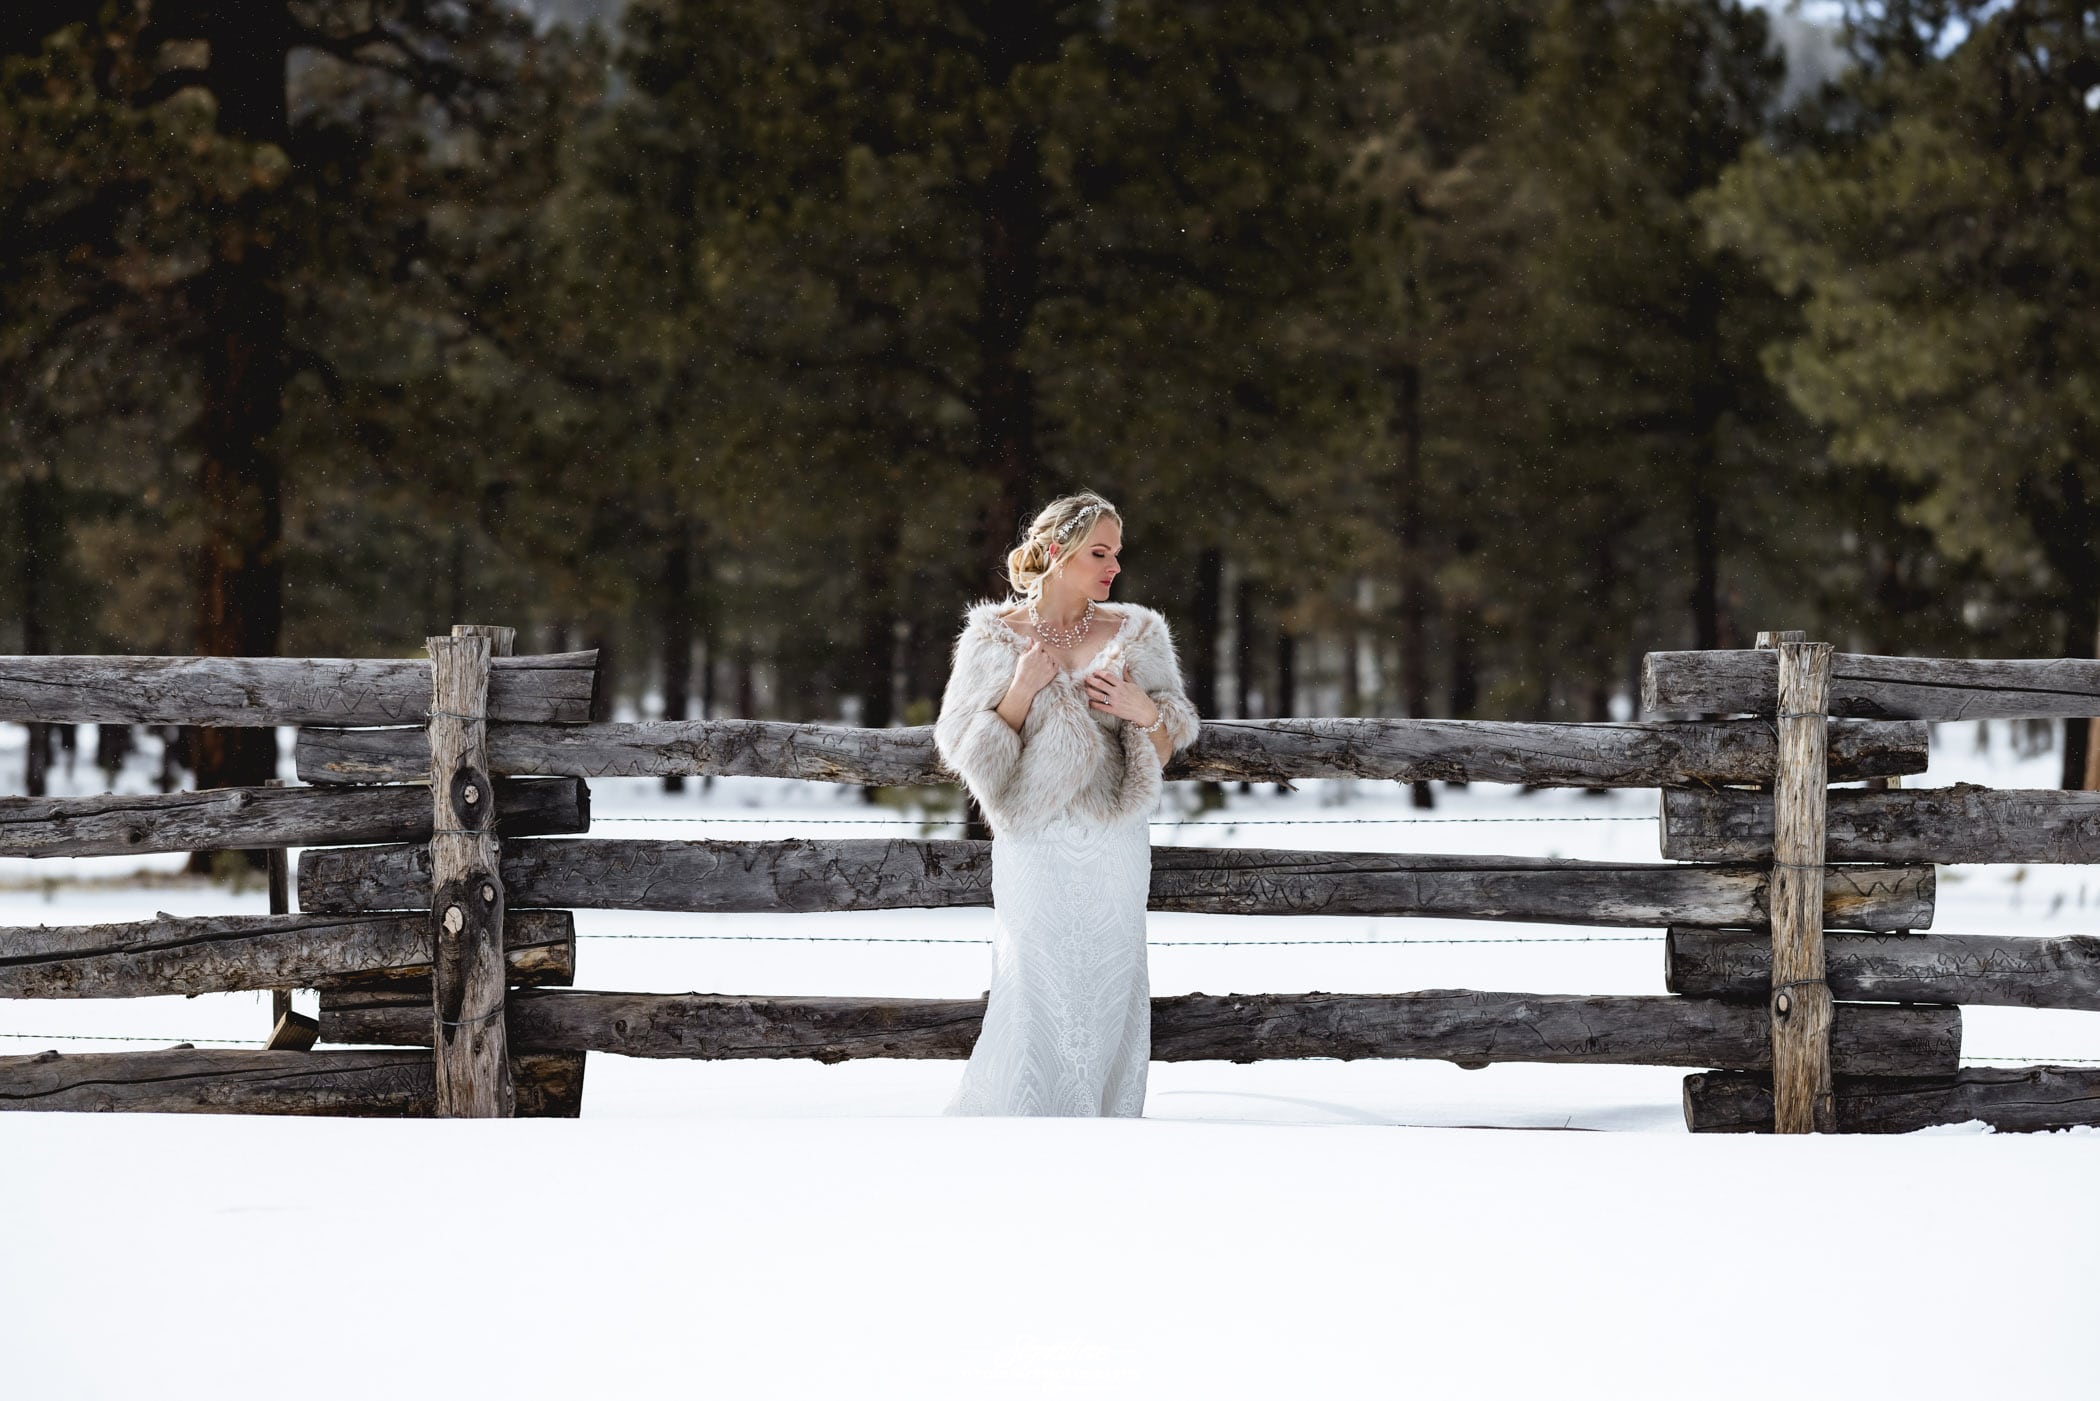 Bride in front of wooden fence in snow